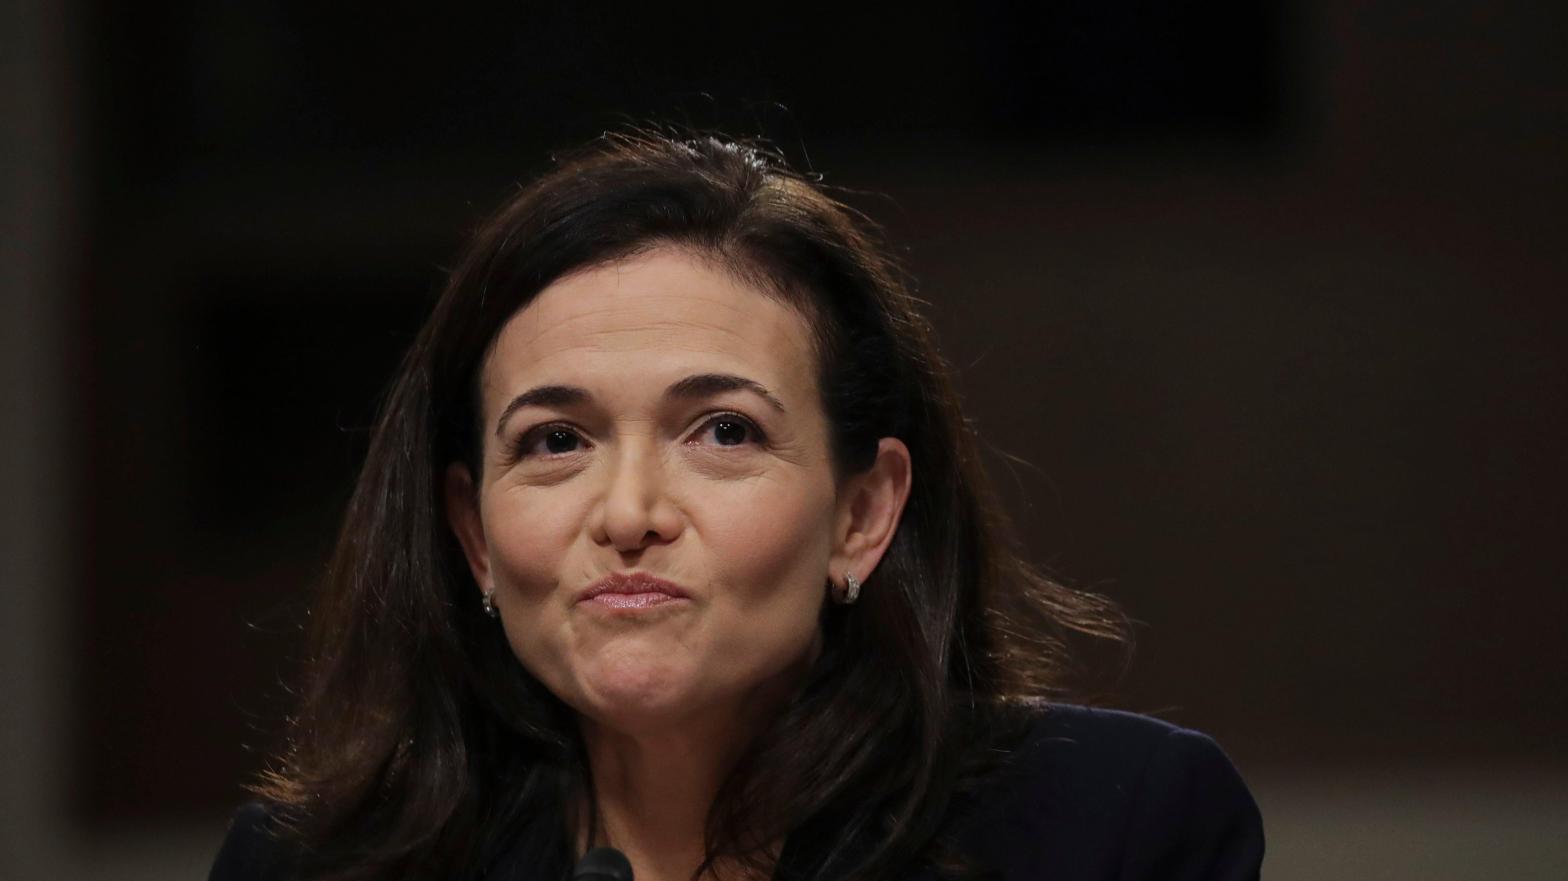 Facebook chief operating officer Sheryl Sandberg testifies during a Senate Intelligence Committee hearing on Sept. 5, 2018 in Washington, DC.  (Photo: Drew Angerer, Getty Images)